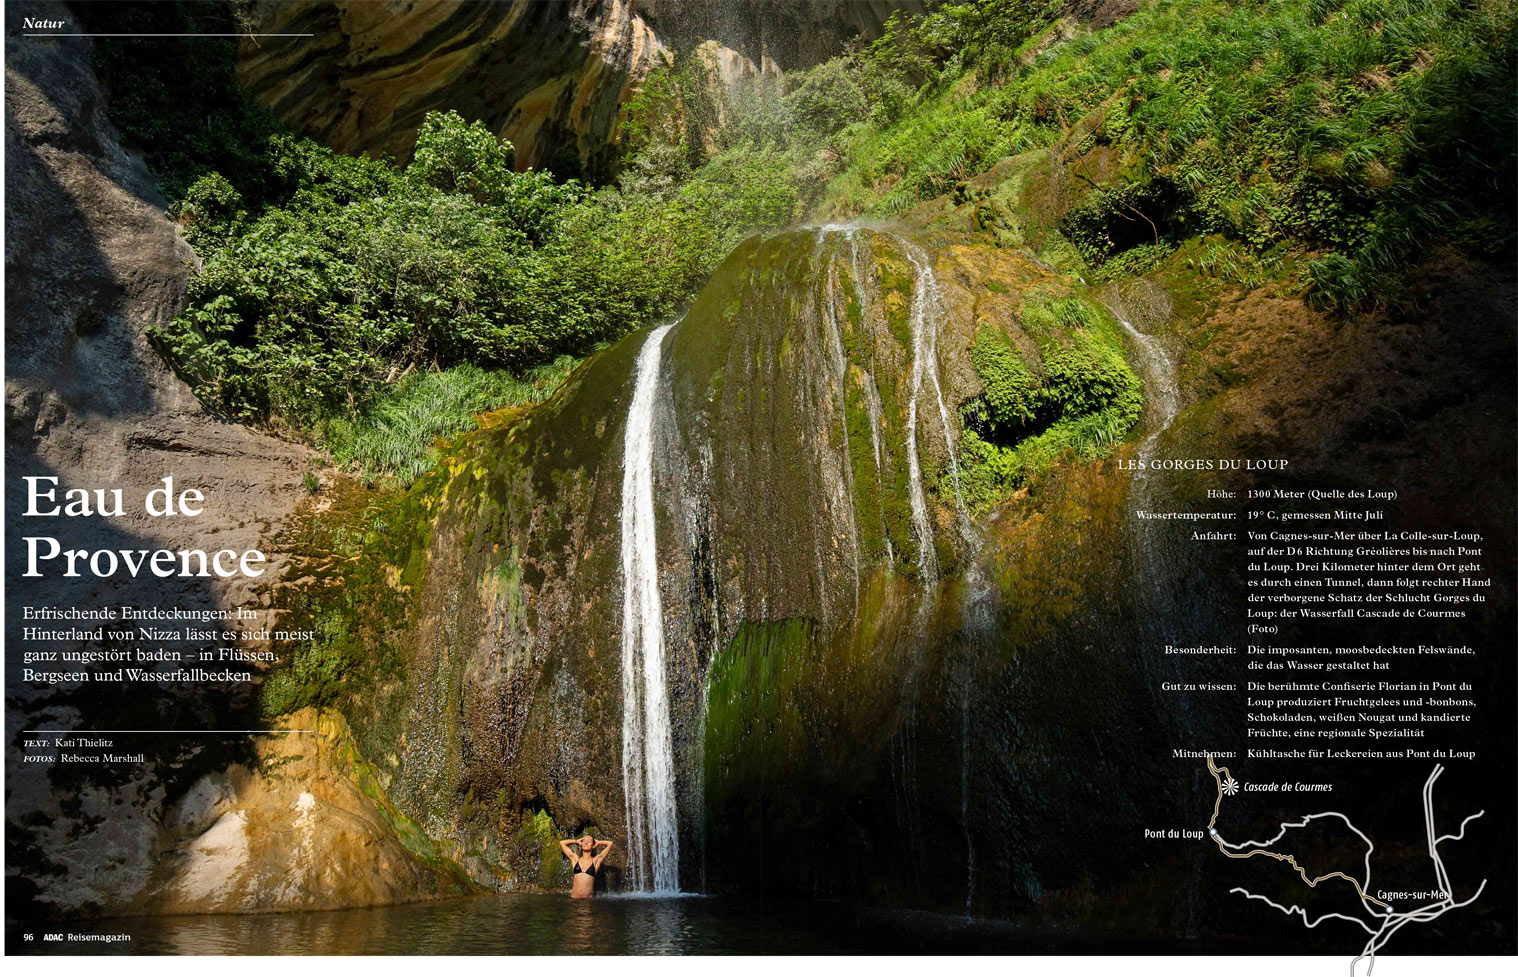 Double page magazine spread showing a full bleed photograph of a girl bathing at the foot of a waterfall